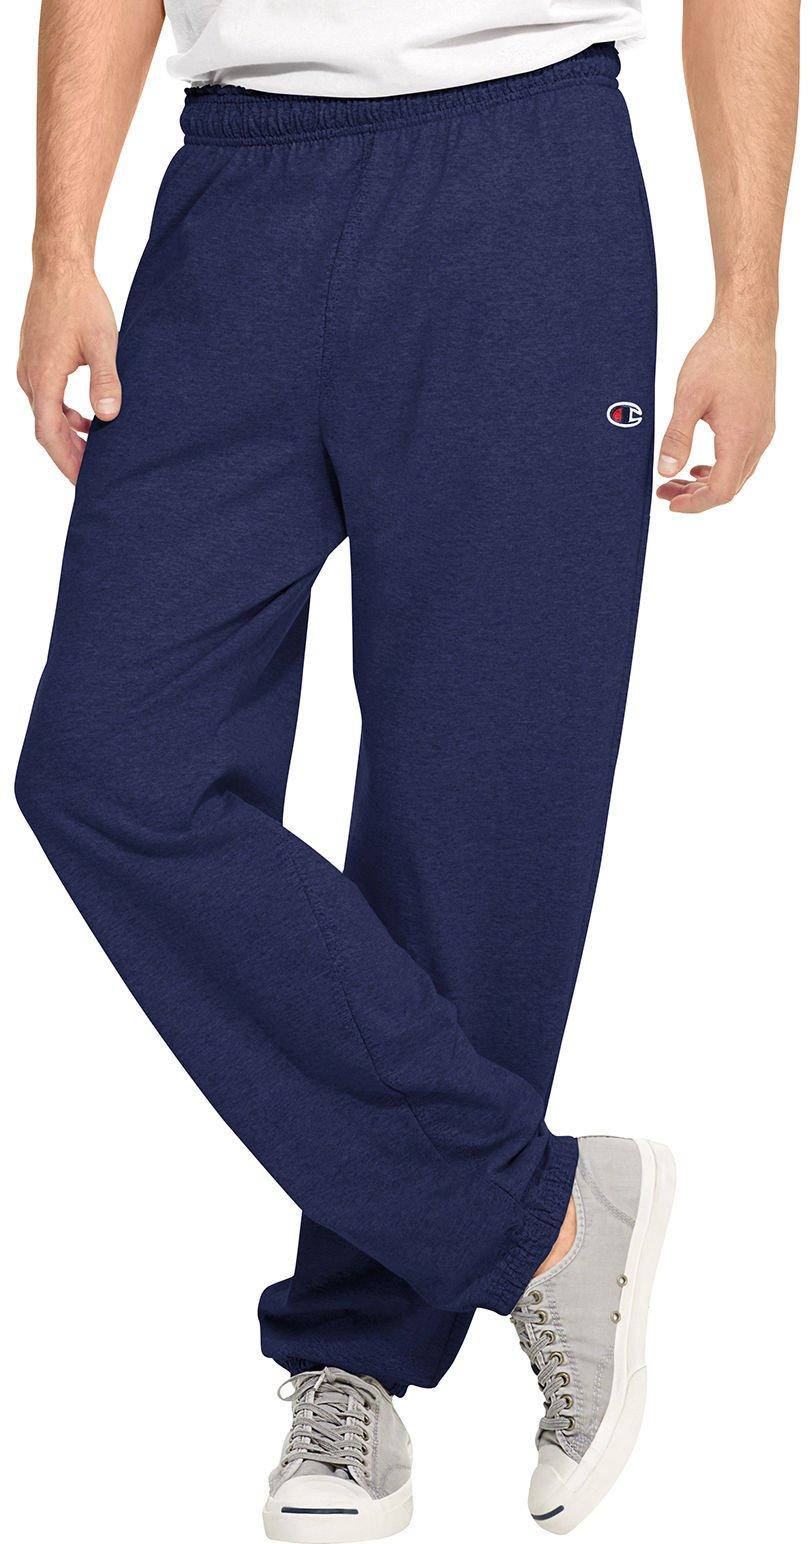 Champions Authentic Apparel Men's Gray Drawstring Sweatpants With Pockets 